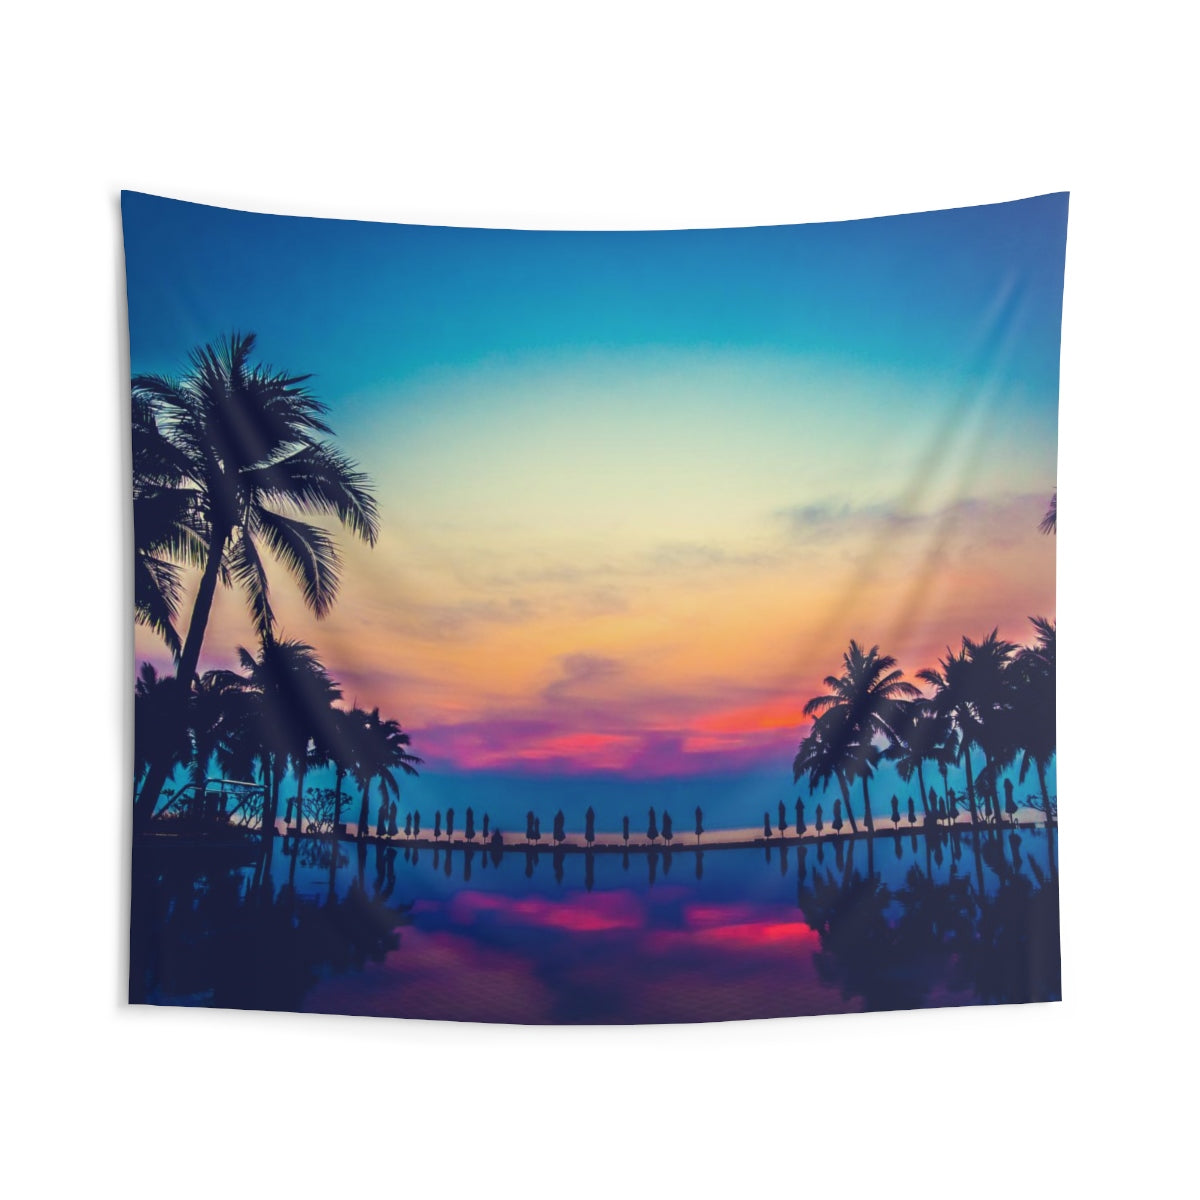 Tropical Palm Trees Pool Tapestry, Sunset Landscape Indoor Wall Art Hanging Tapestries Large Small Decor Home Dorm Room Gift Starcove Fashion